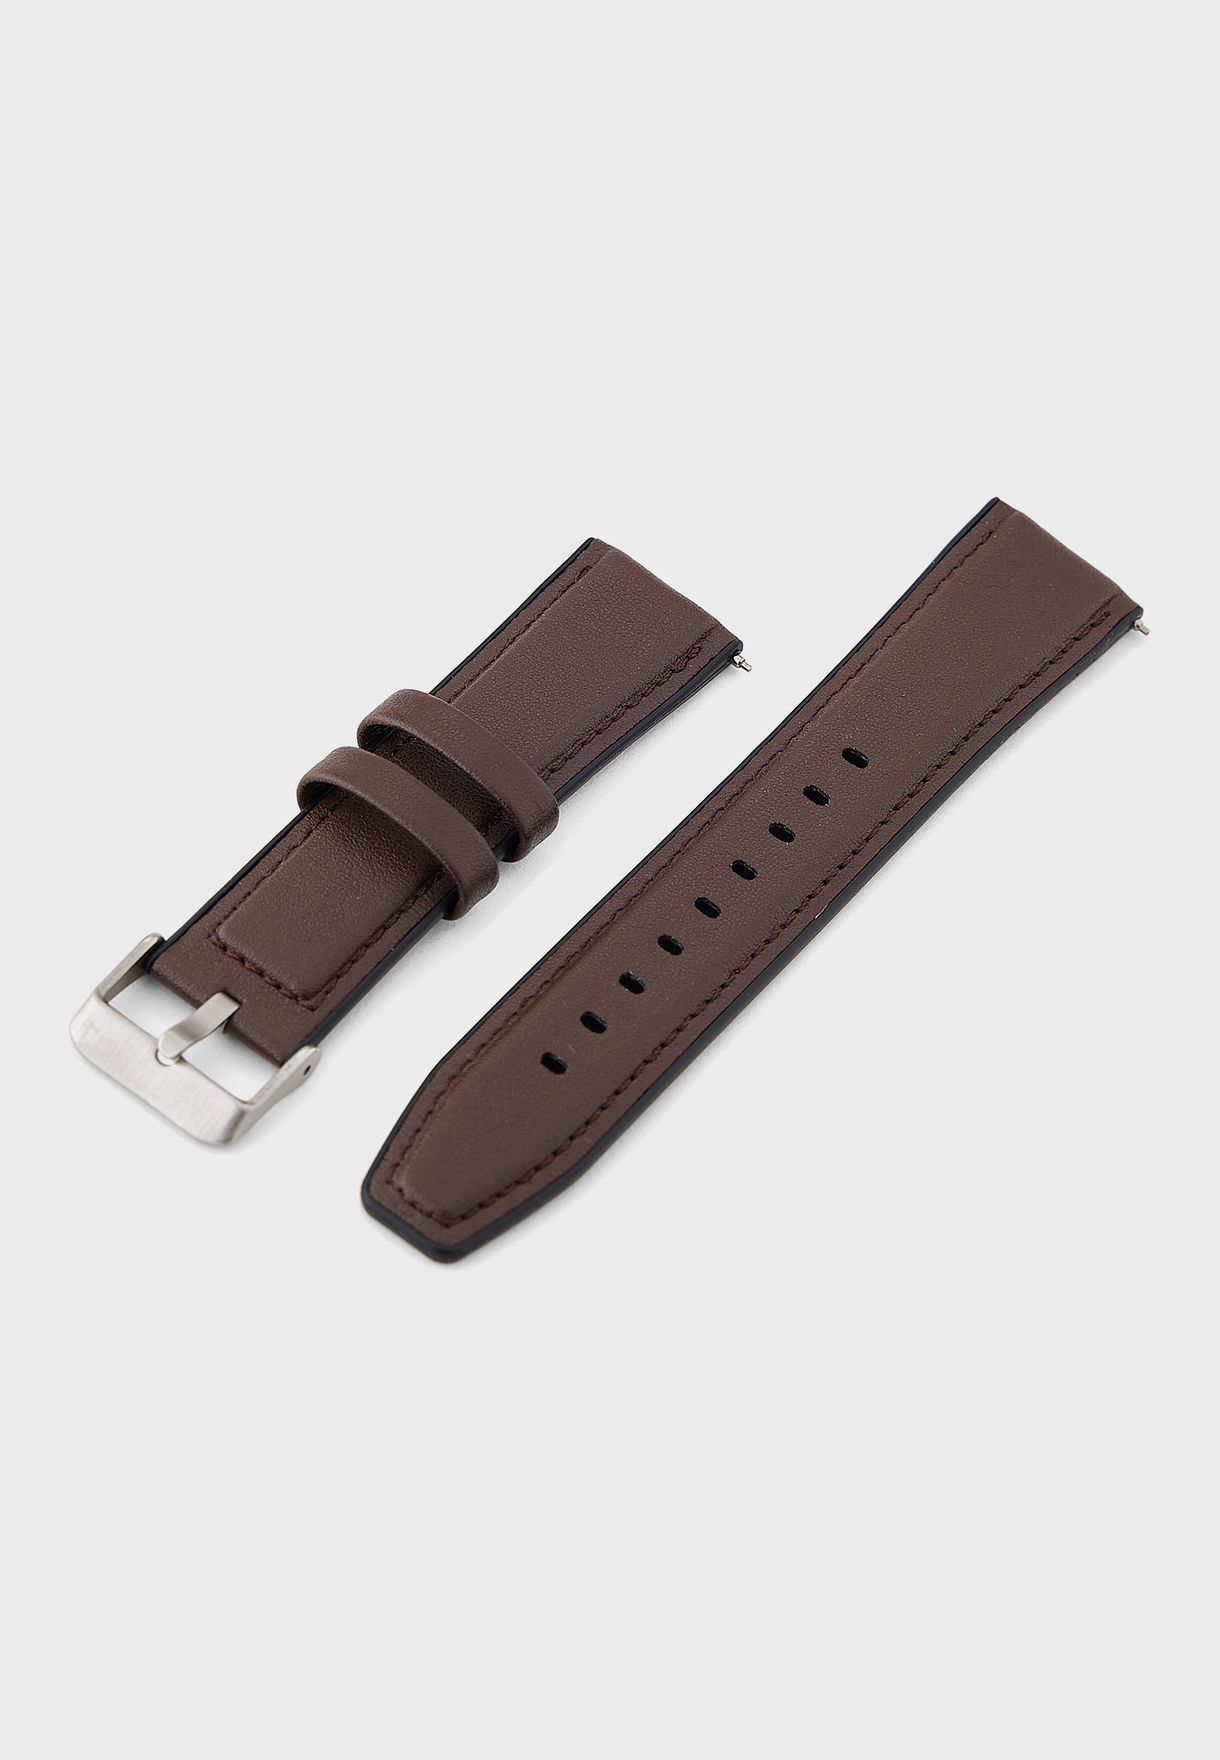 Genuine Leather And Metal Strap Smart Watch With Heart Rate And Fitness Features